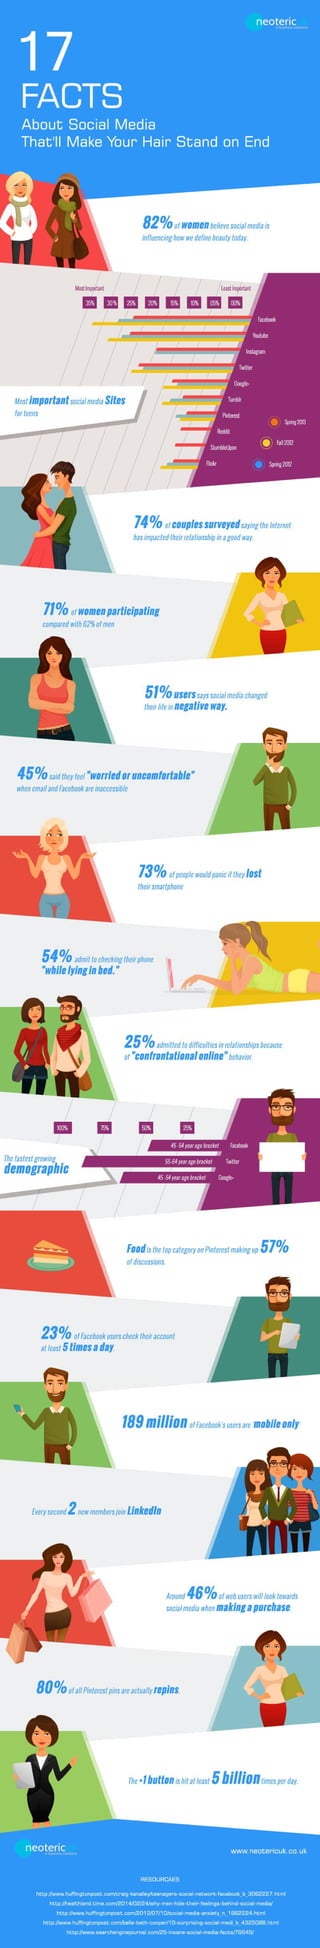 17 facts about social media that'll make your hair stand on end!